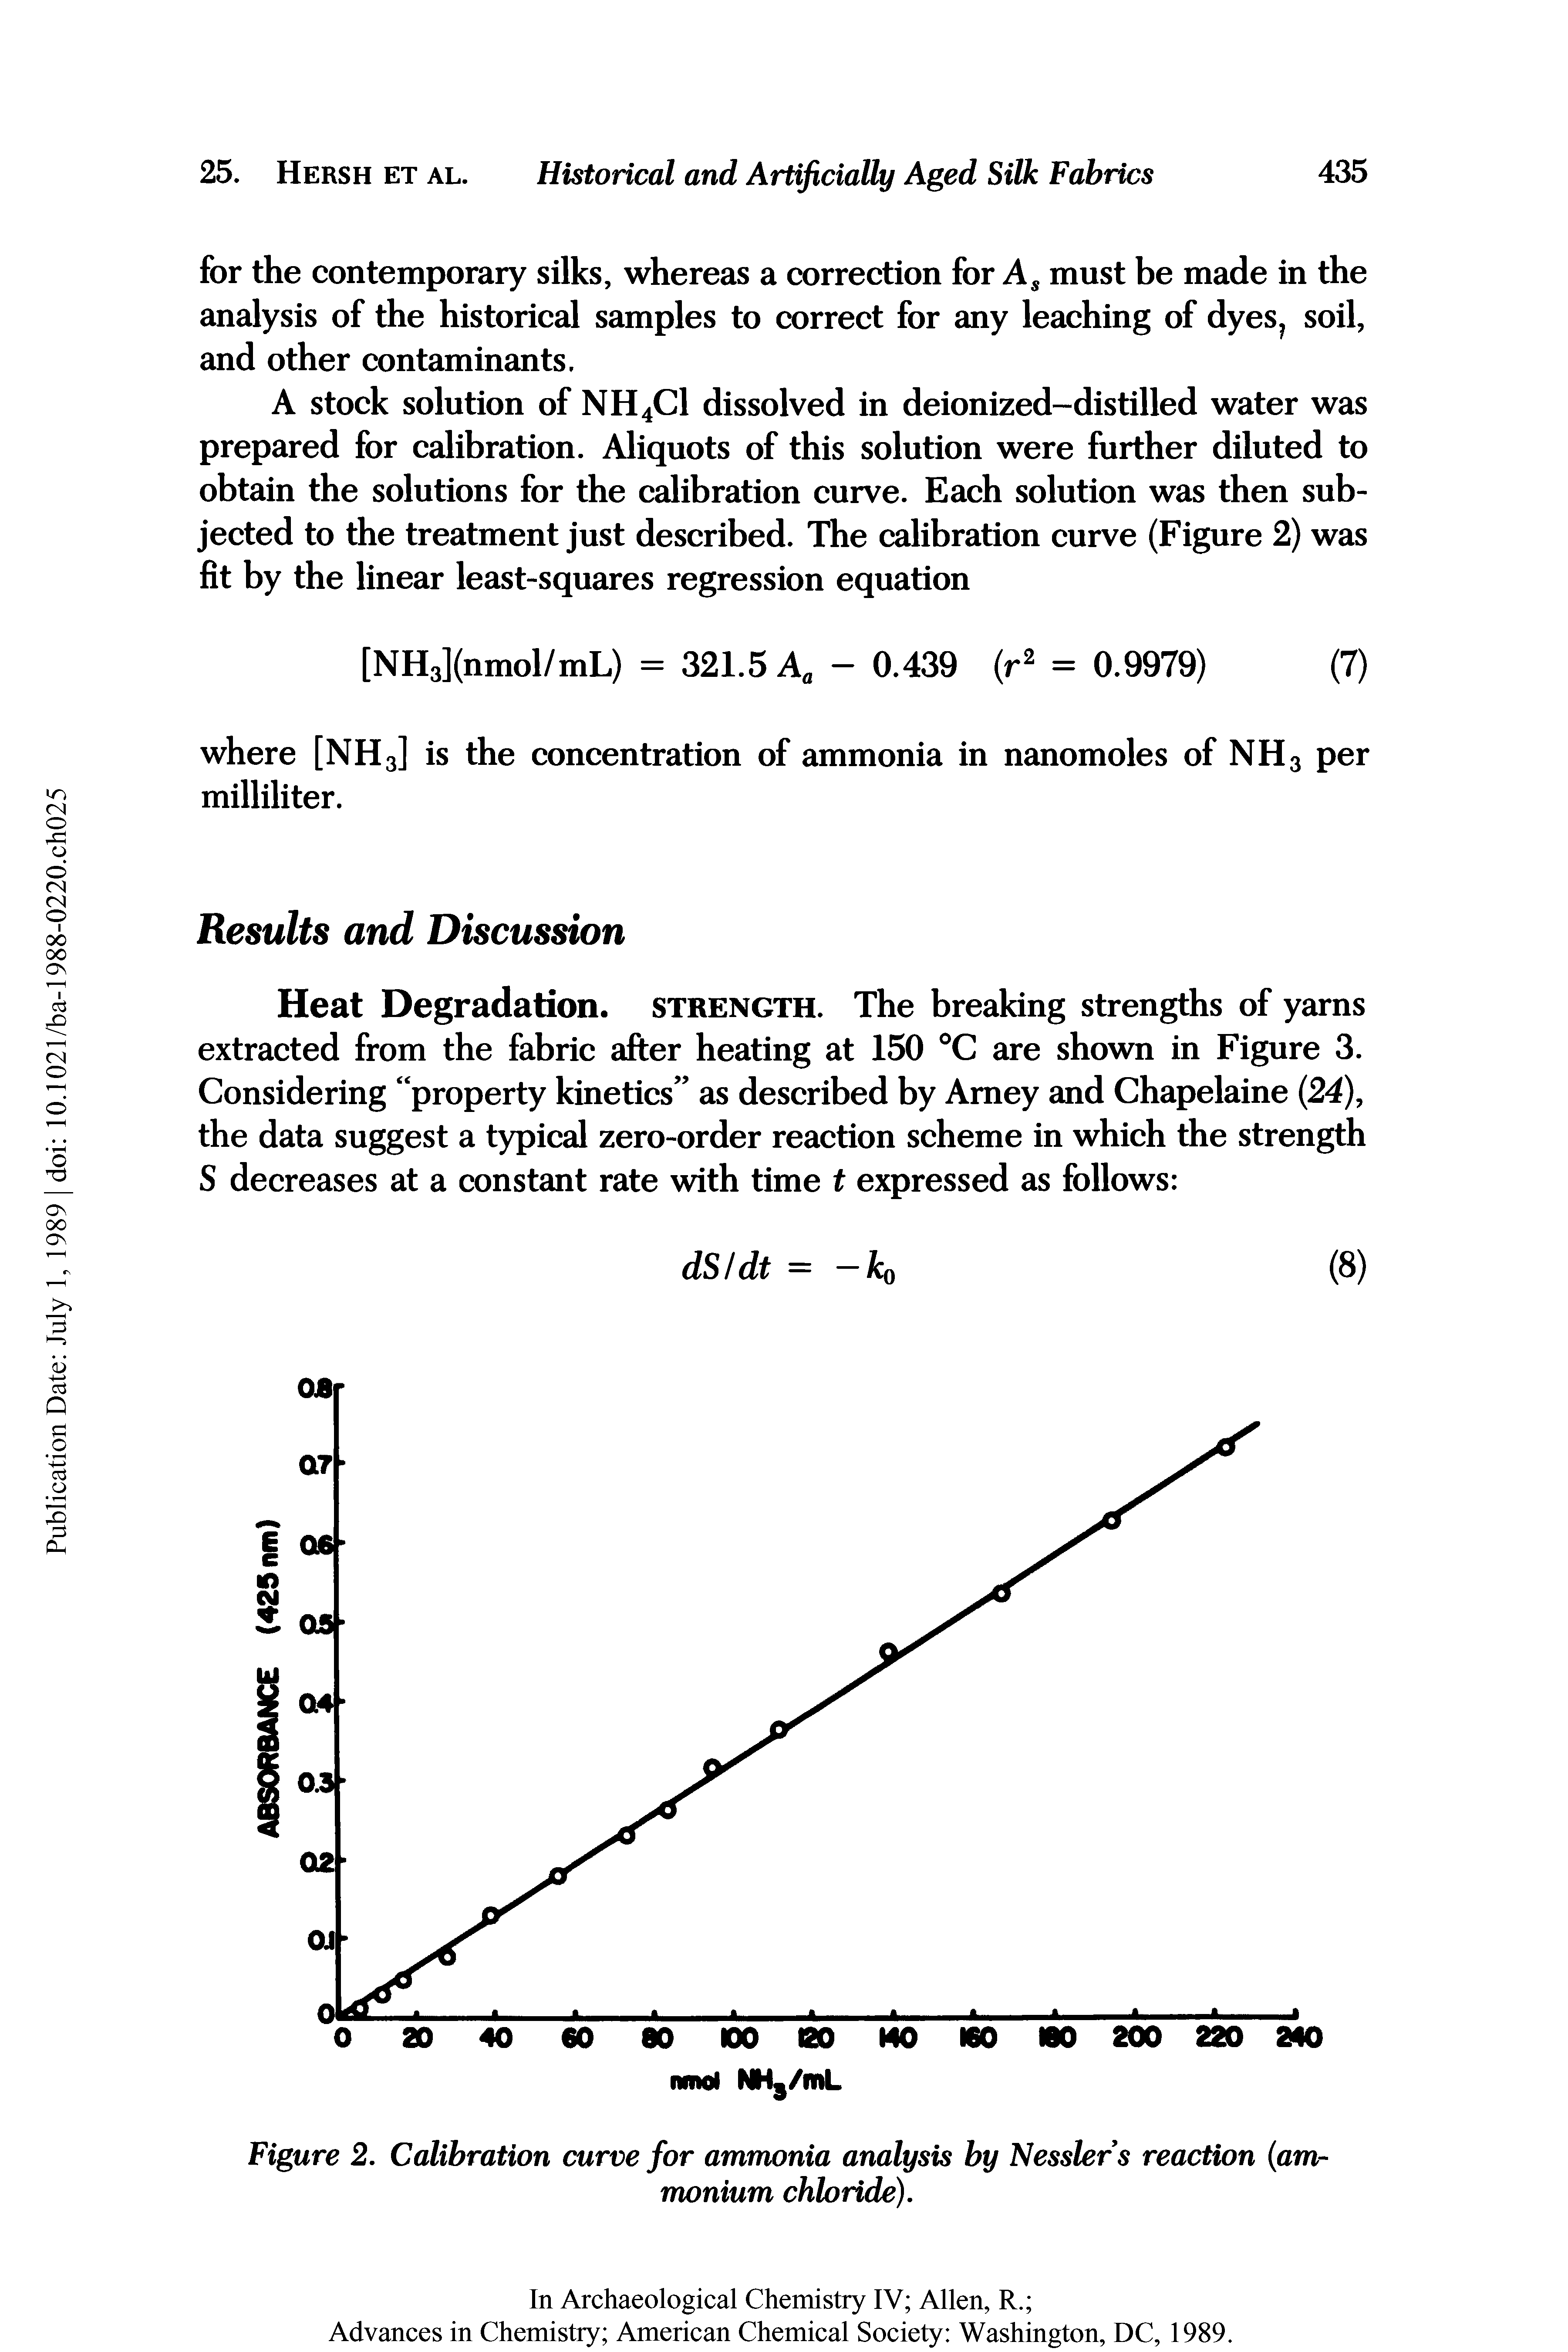 Figure 2. Calibration curve for ammonia analysis by Nesslers reaction (ammonium chloride).